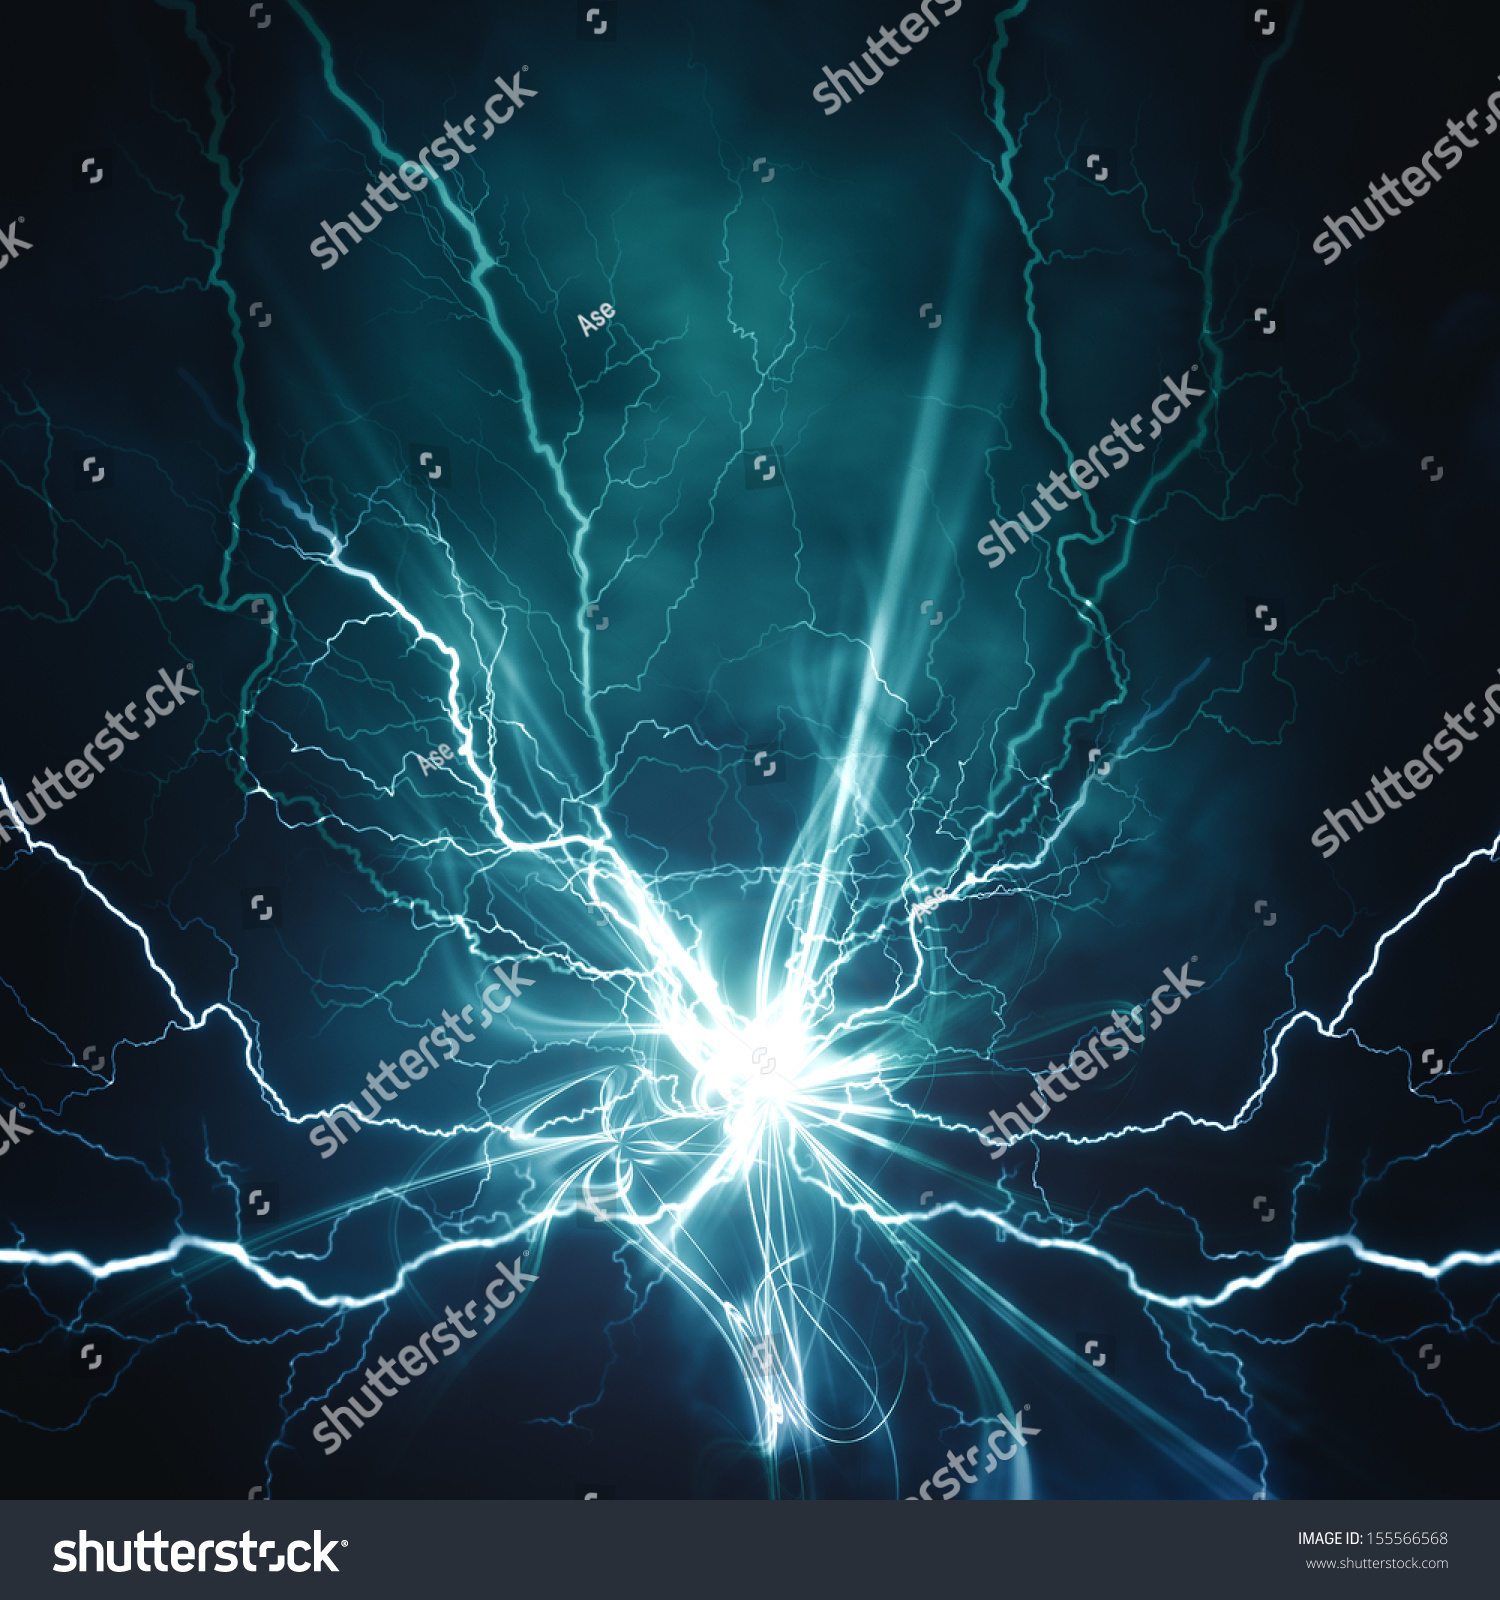 Electric lighting effect, abstract techno backgrounds for your design  #155566568